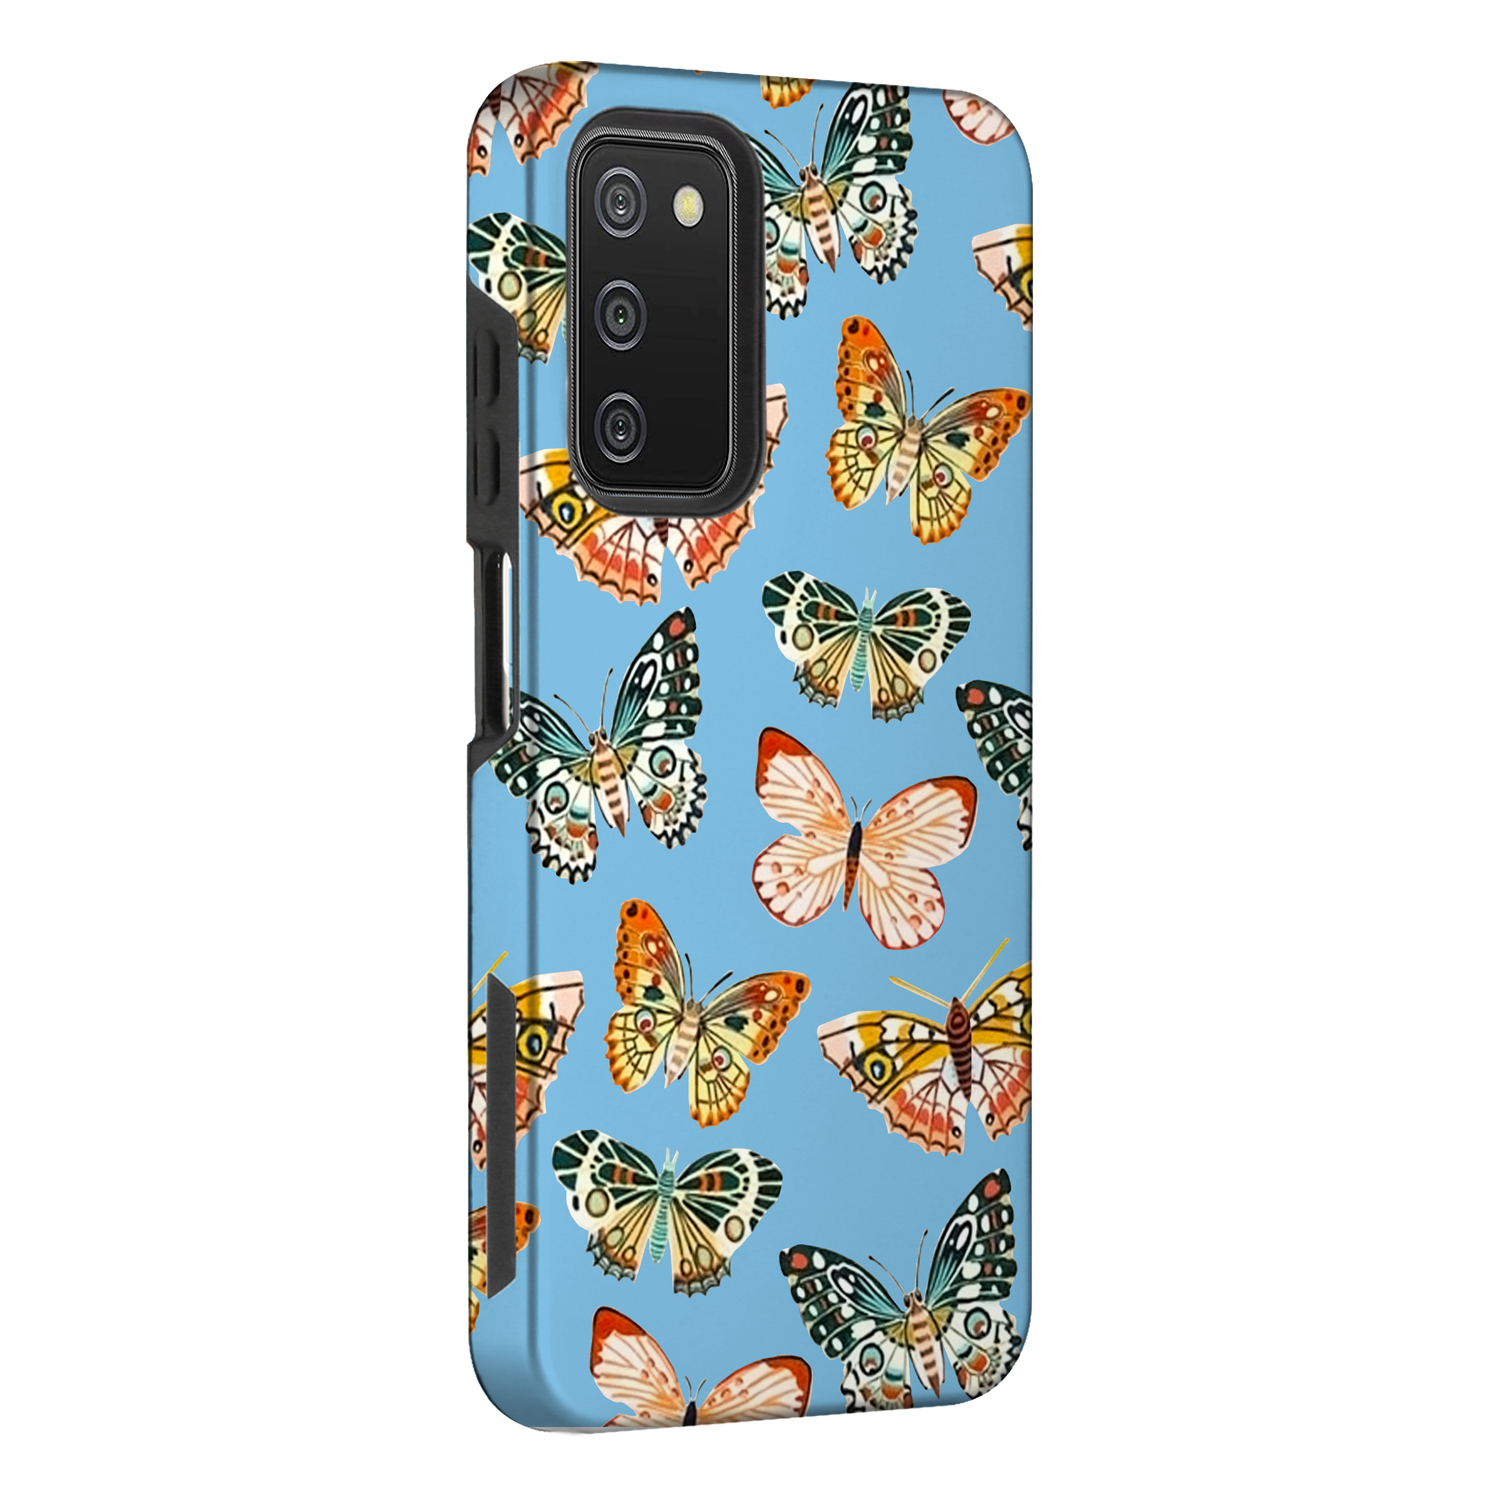 Glossy Design Dual Layer Armor Case Cover for Galaxy A03s (Butterfly)